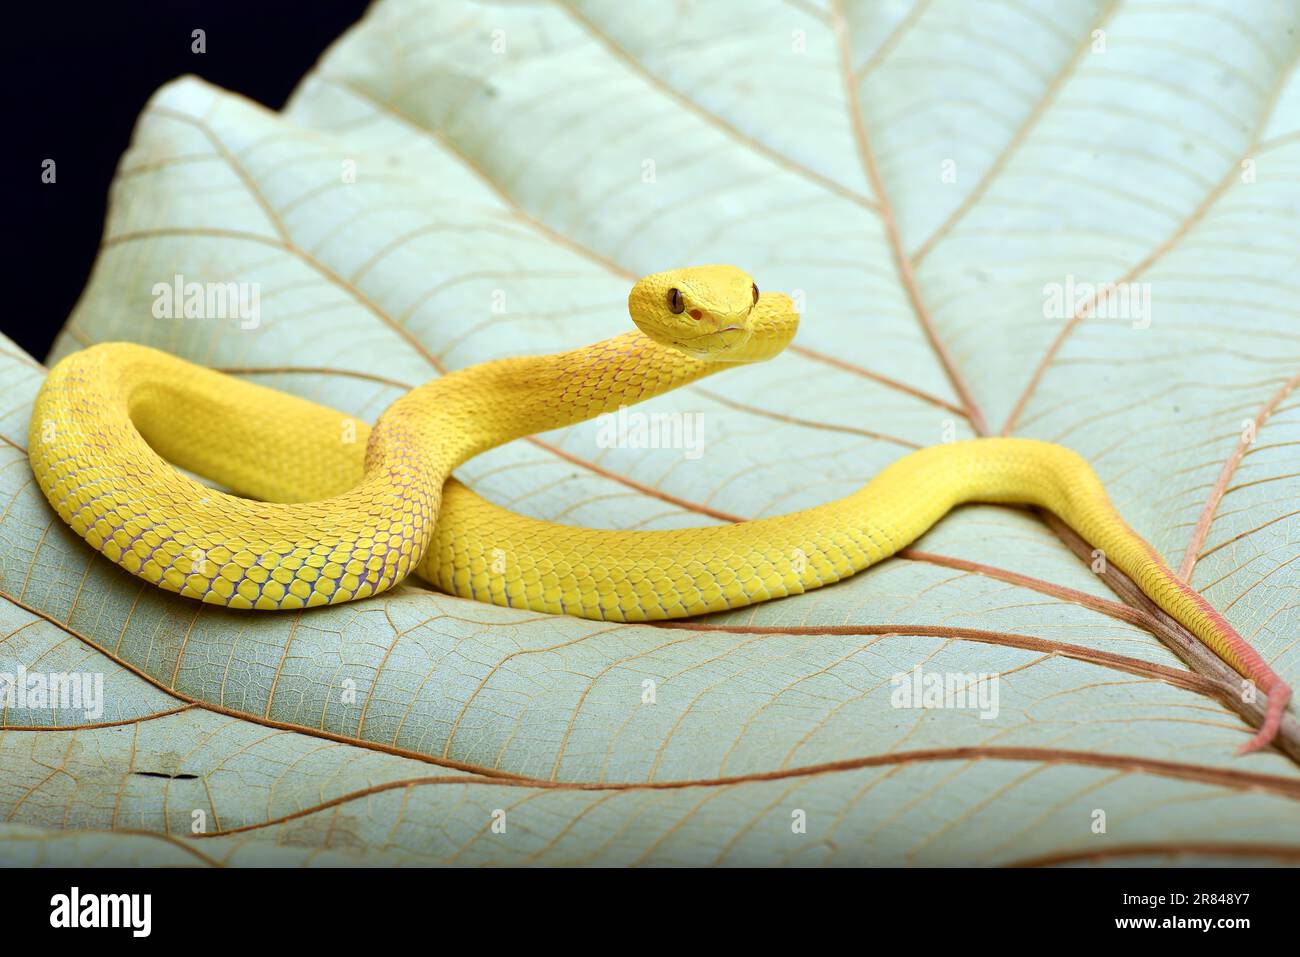 Yellow pit viper on a leaves Stock Photo